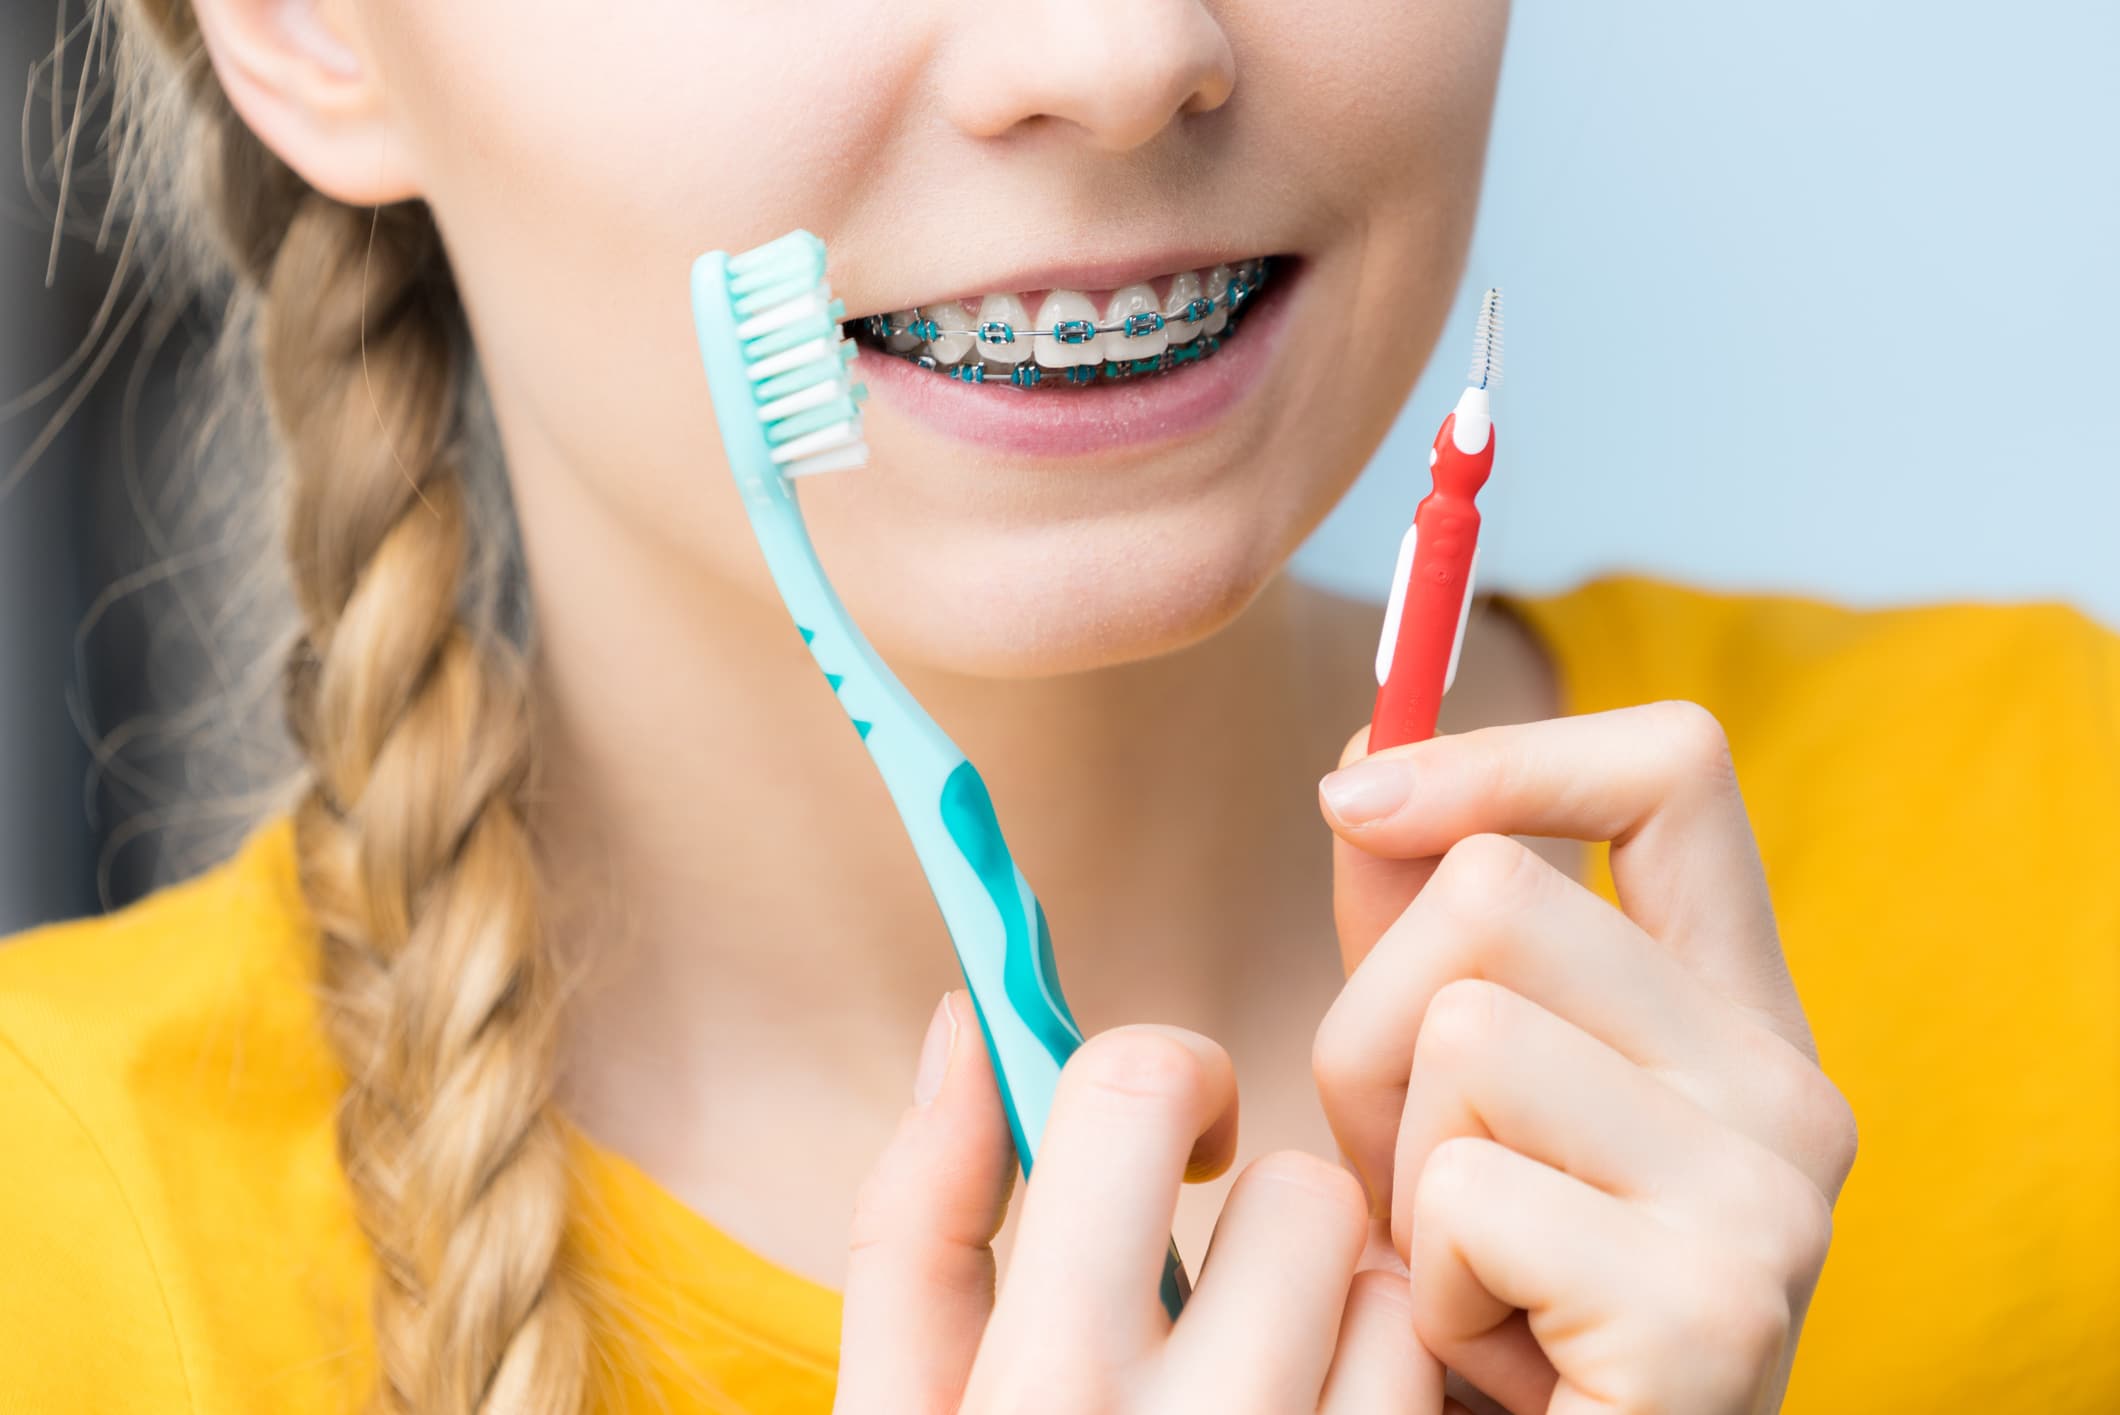 Woman smiling cleaning teeth with braces